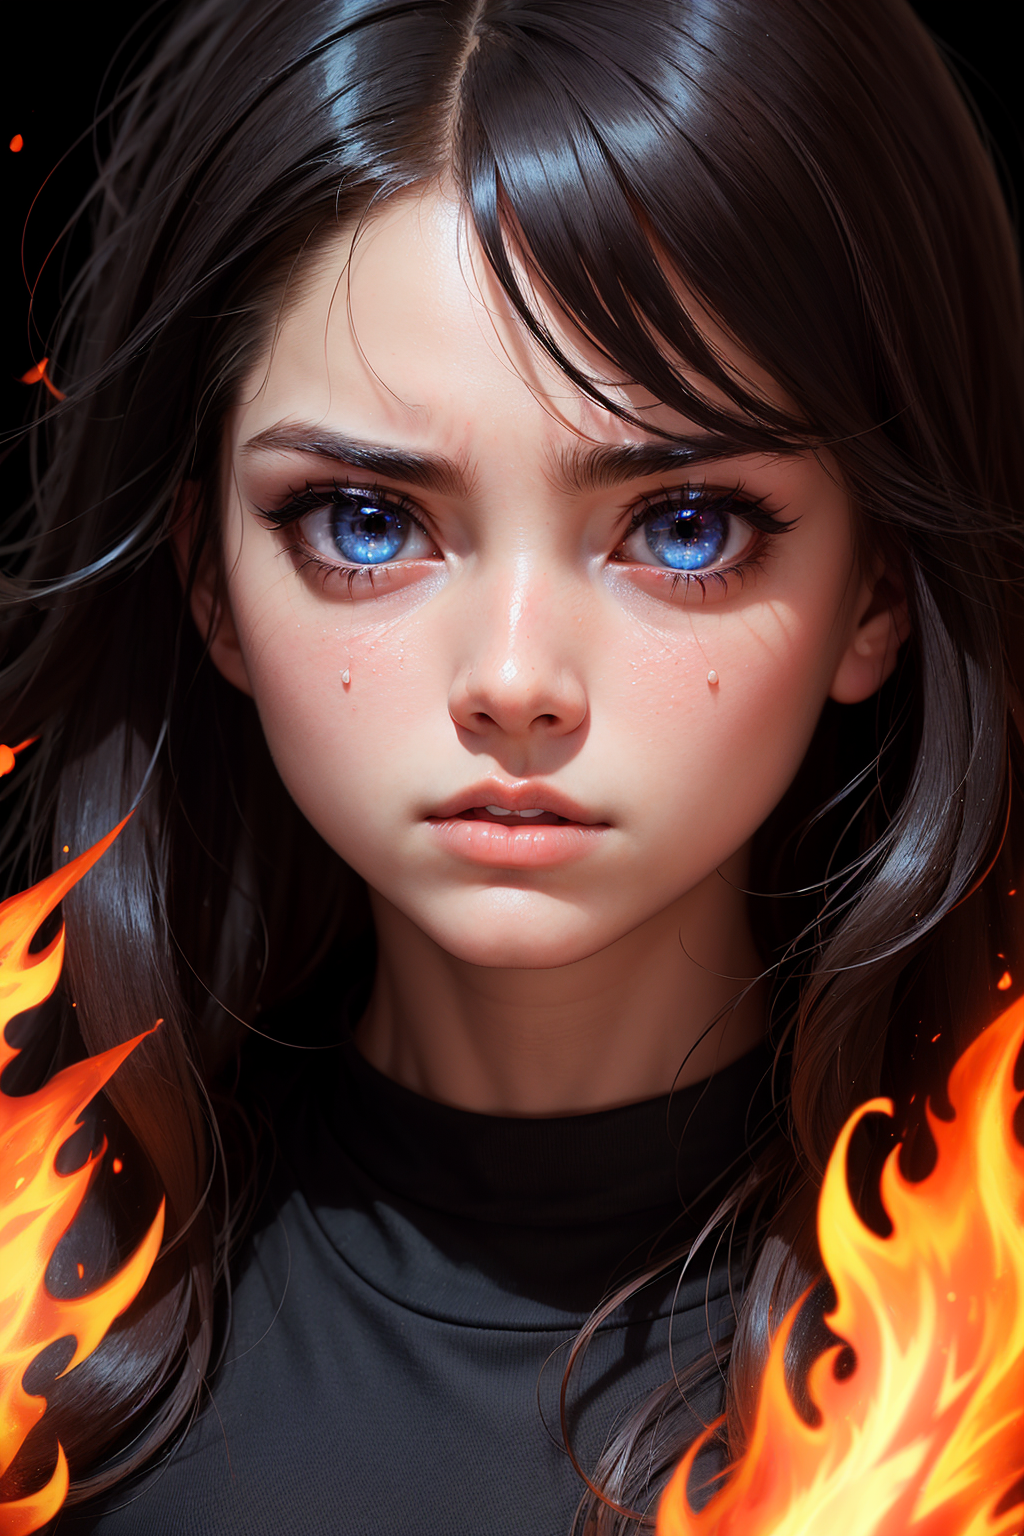 Anime-style girl with blue eyes and purple eyelashes and a single tear, with a fiery background.